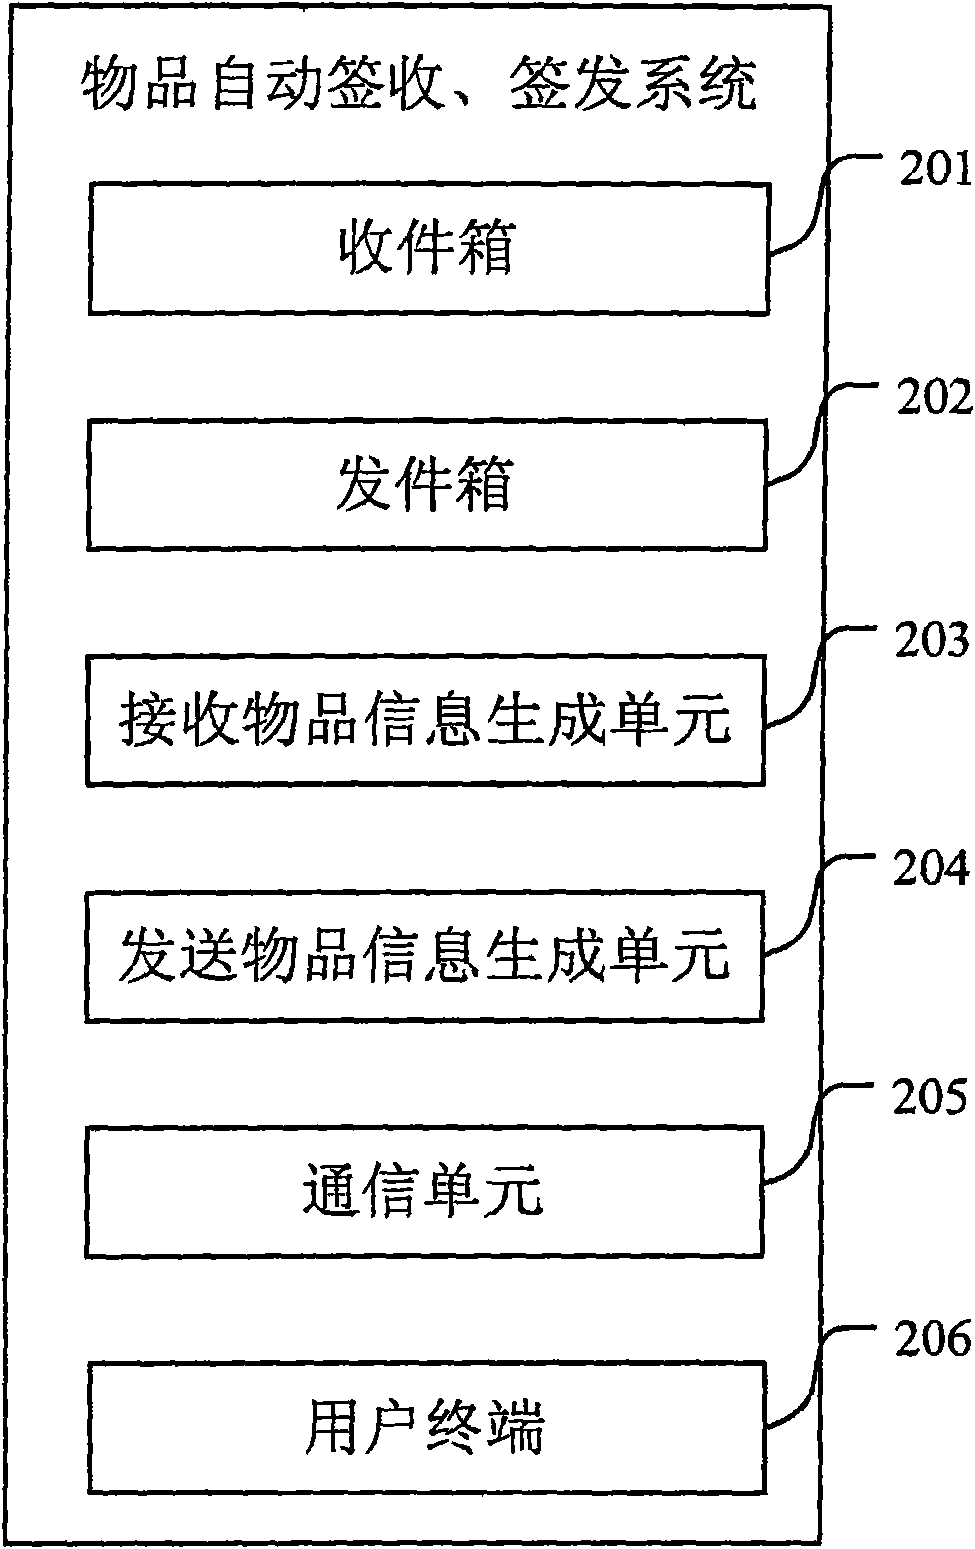 Method and system thereof for automatically signing in and issuing article